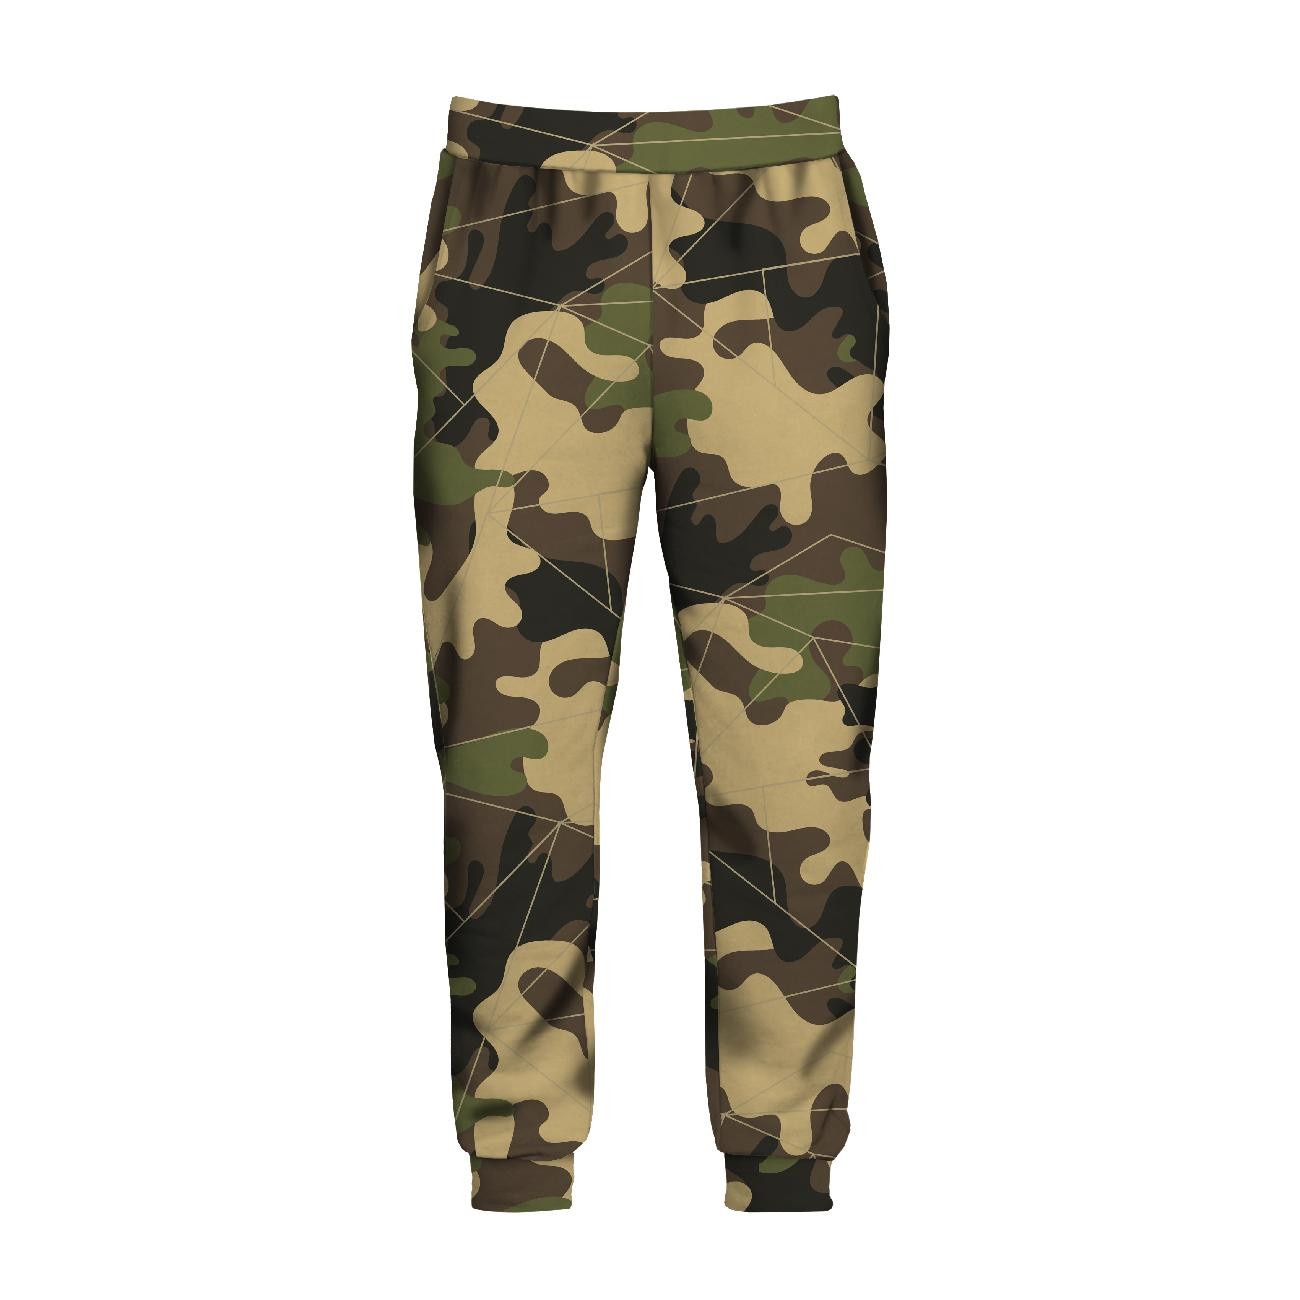 MEN'S JOGGERS (GREG) - CAMOUFLAGE OLIVE - sewing set